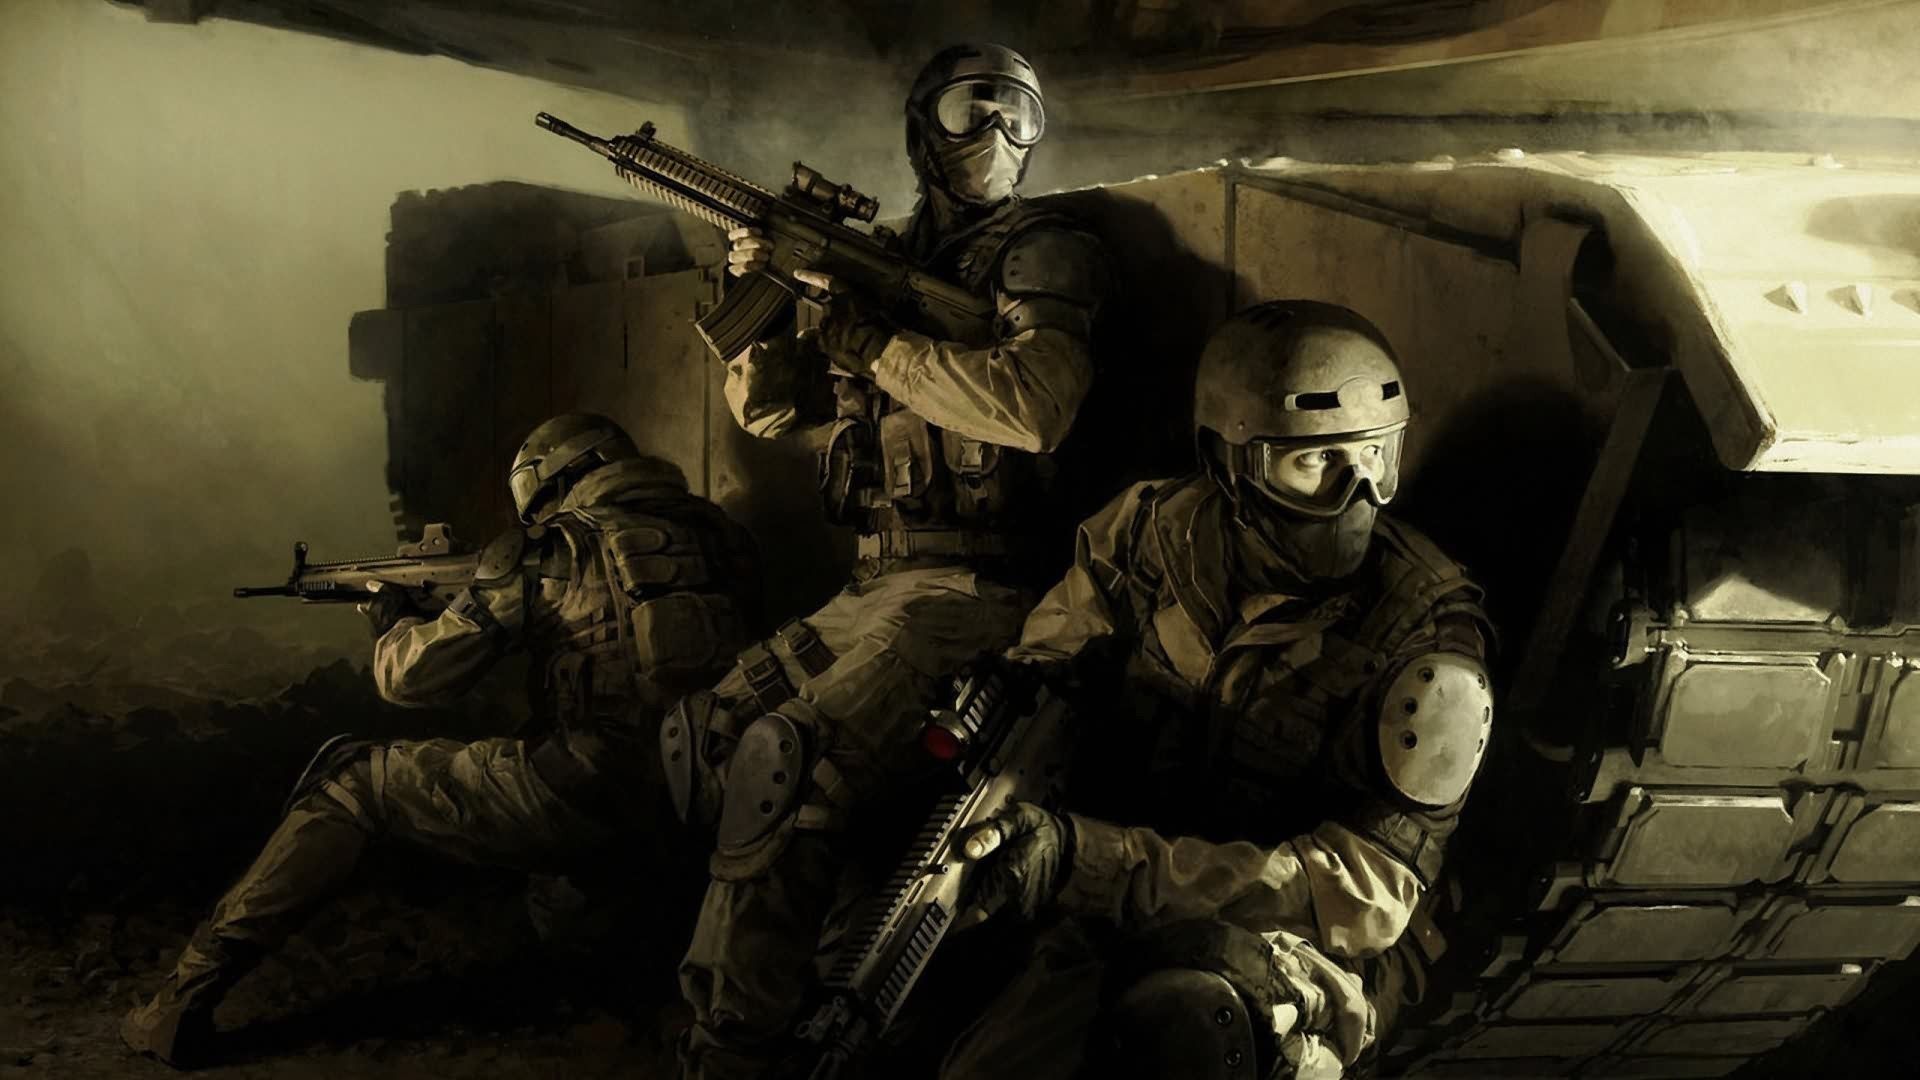 Special Forces soldiers in a tank Desktop wallpaper 1920x1080